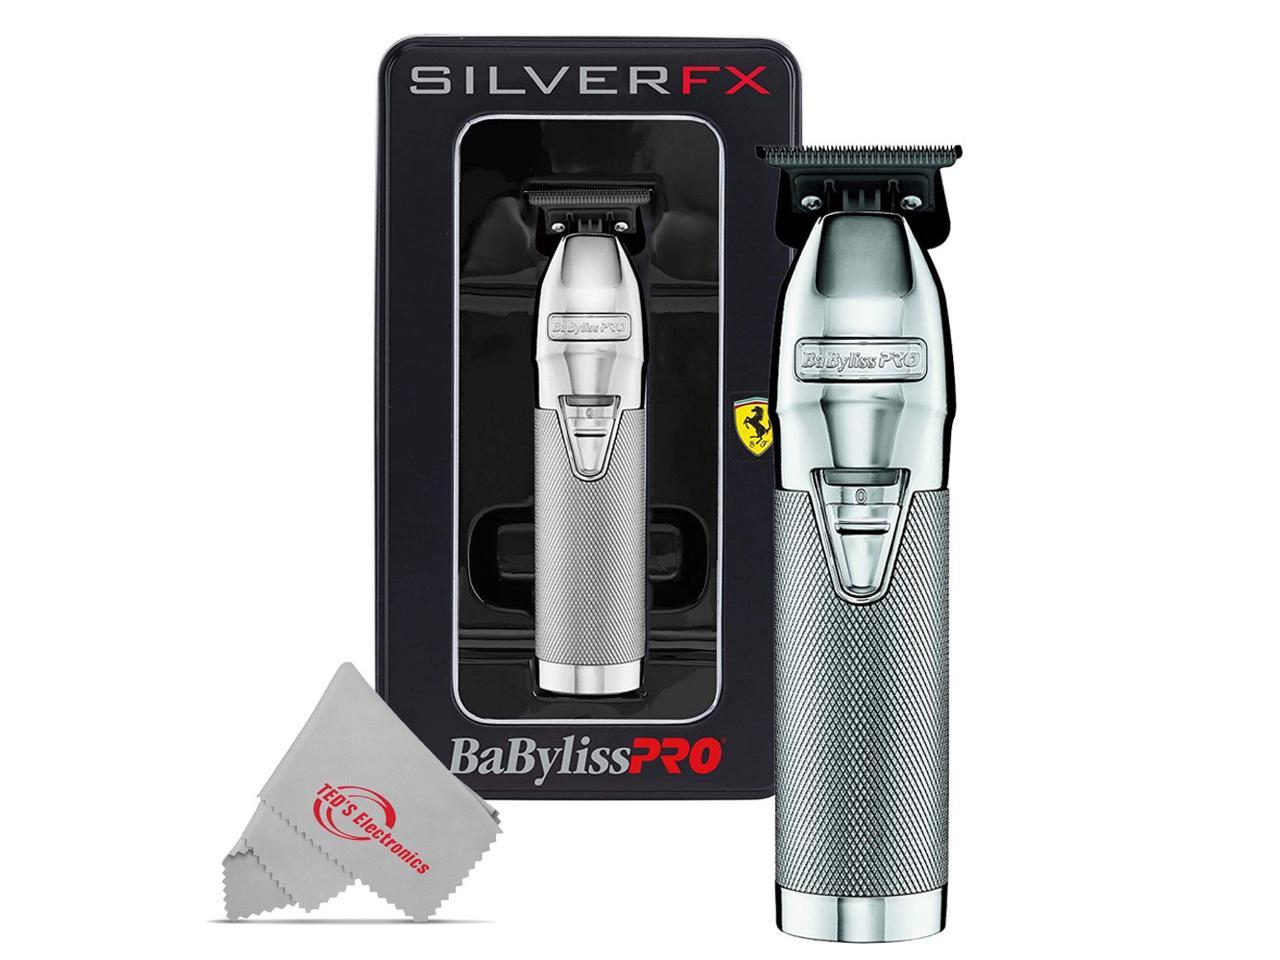 silver fx babyliss pro clippers